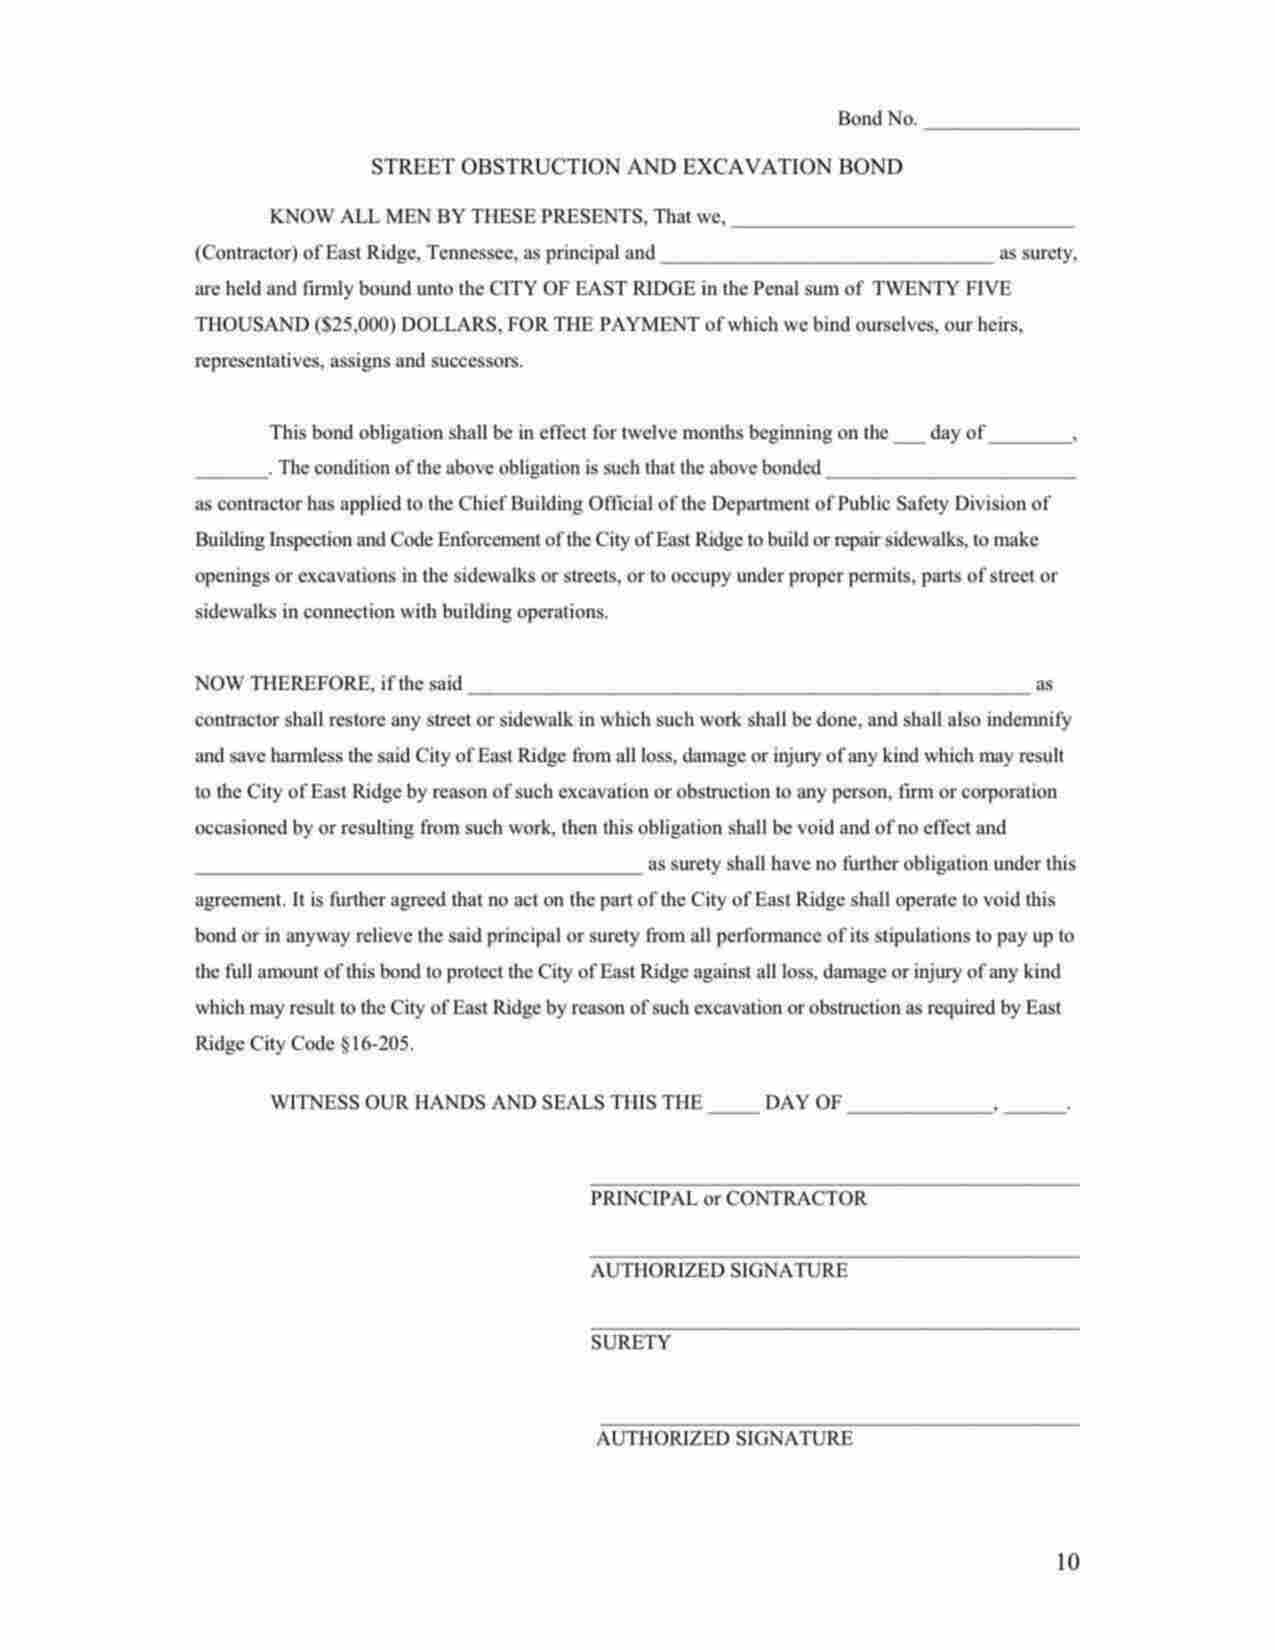 Tennessee Street Obstruction and Excavation Bond Form